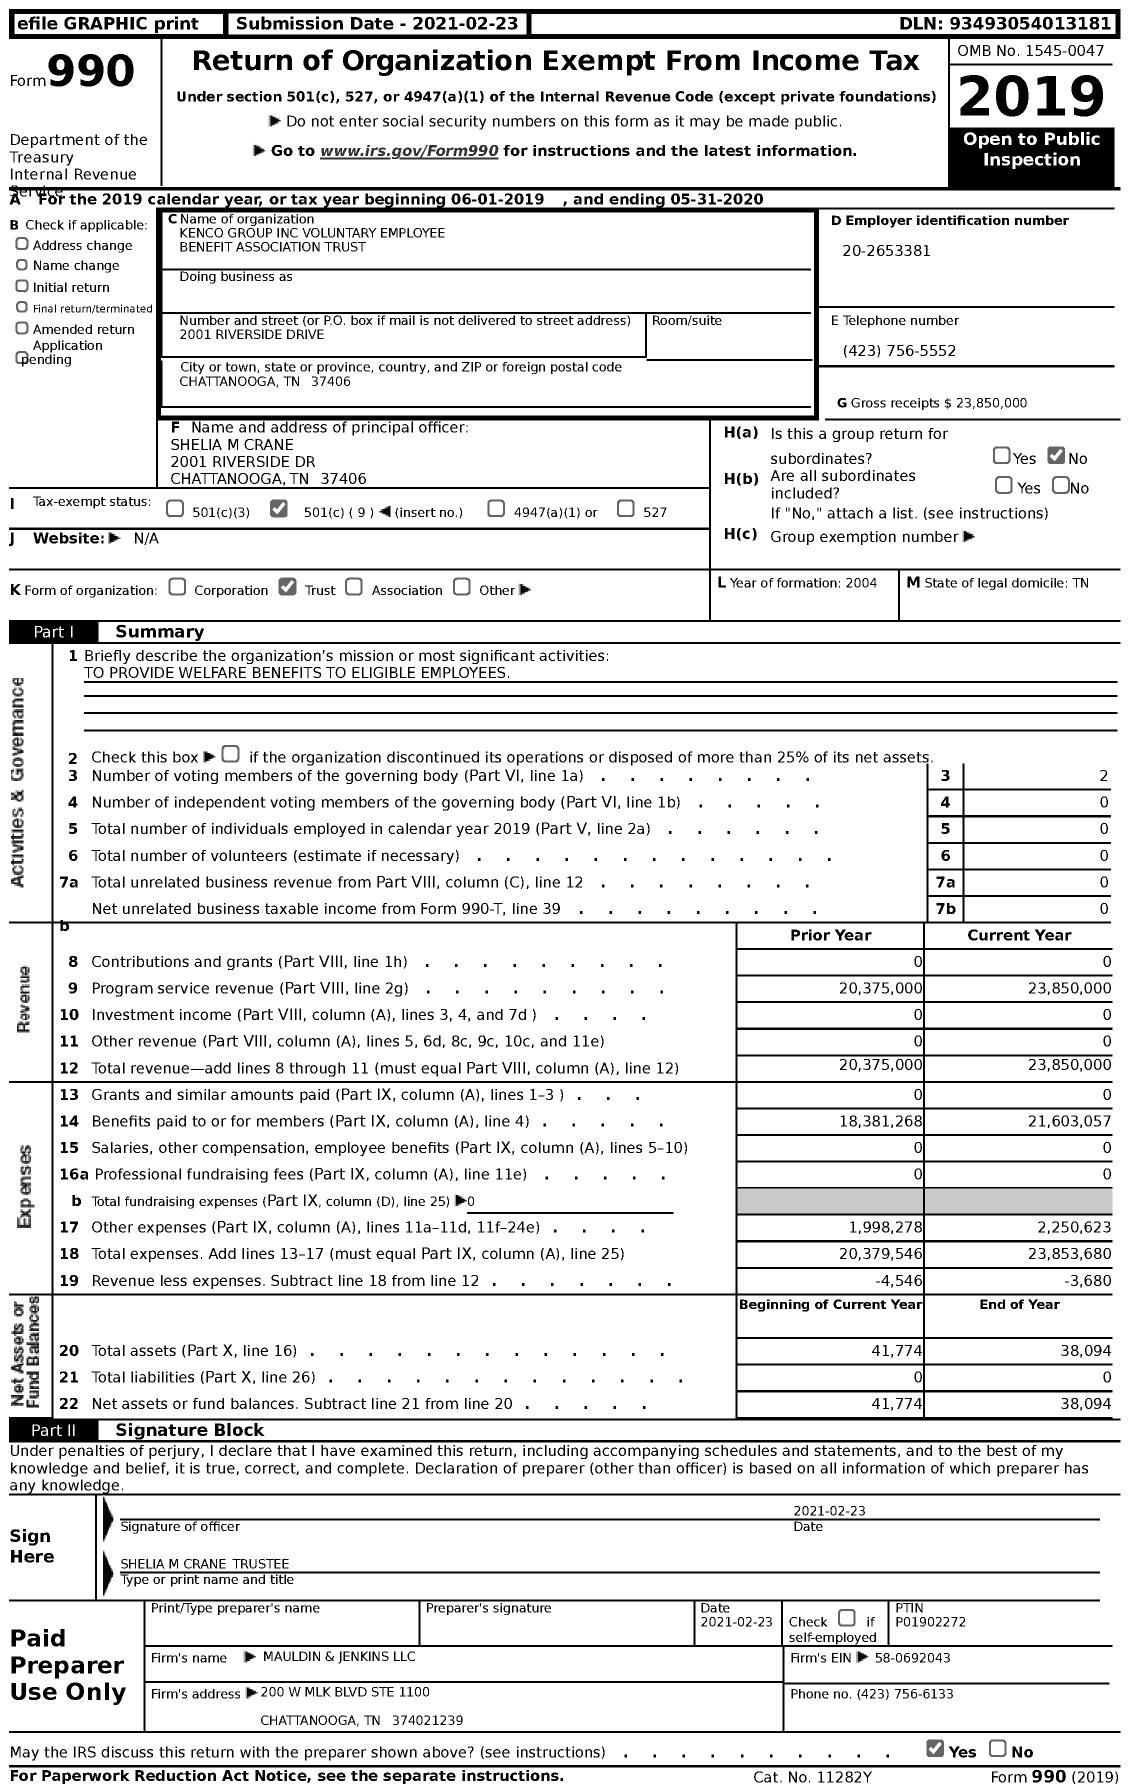 Image of first page of 2019 Form 990 for Kenco Group Voluntary Employee Benefit Association Trust